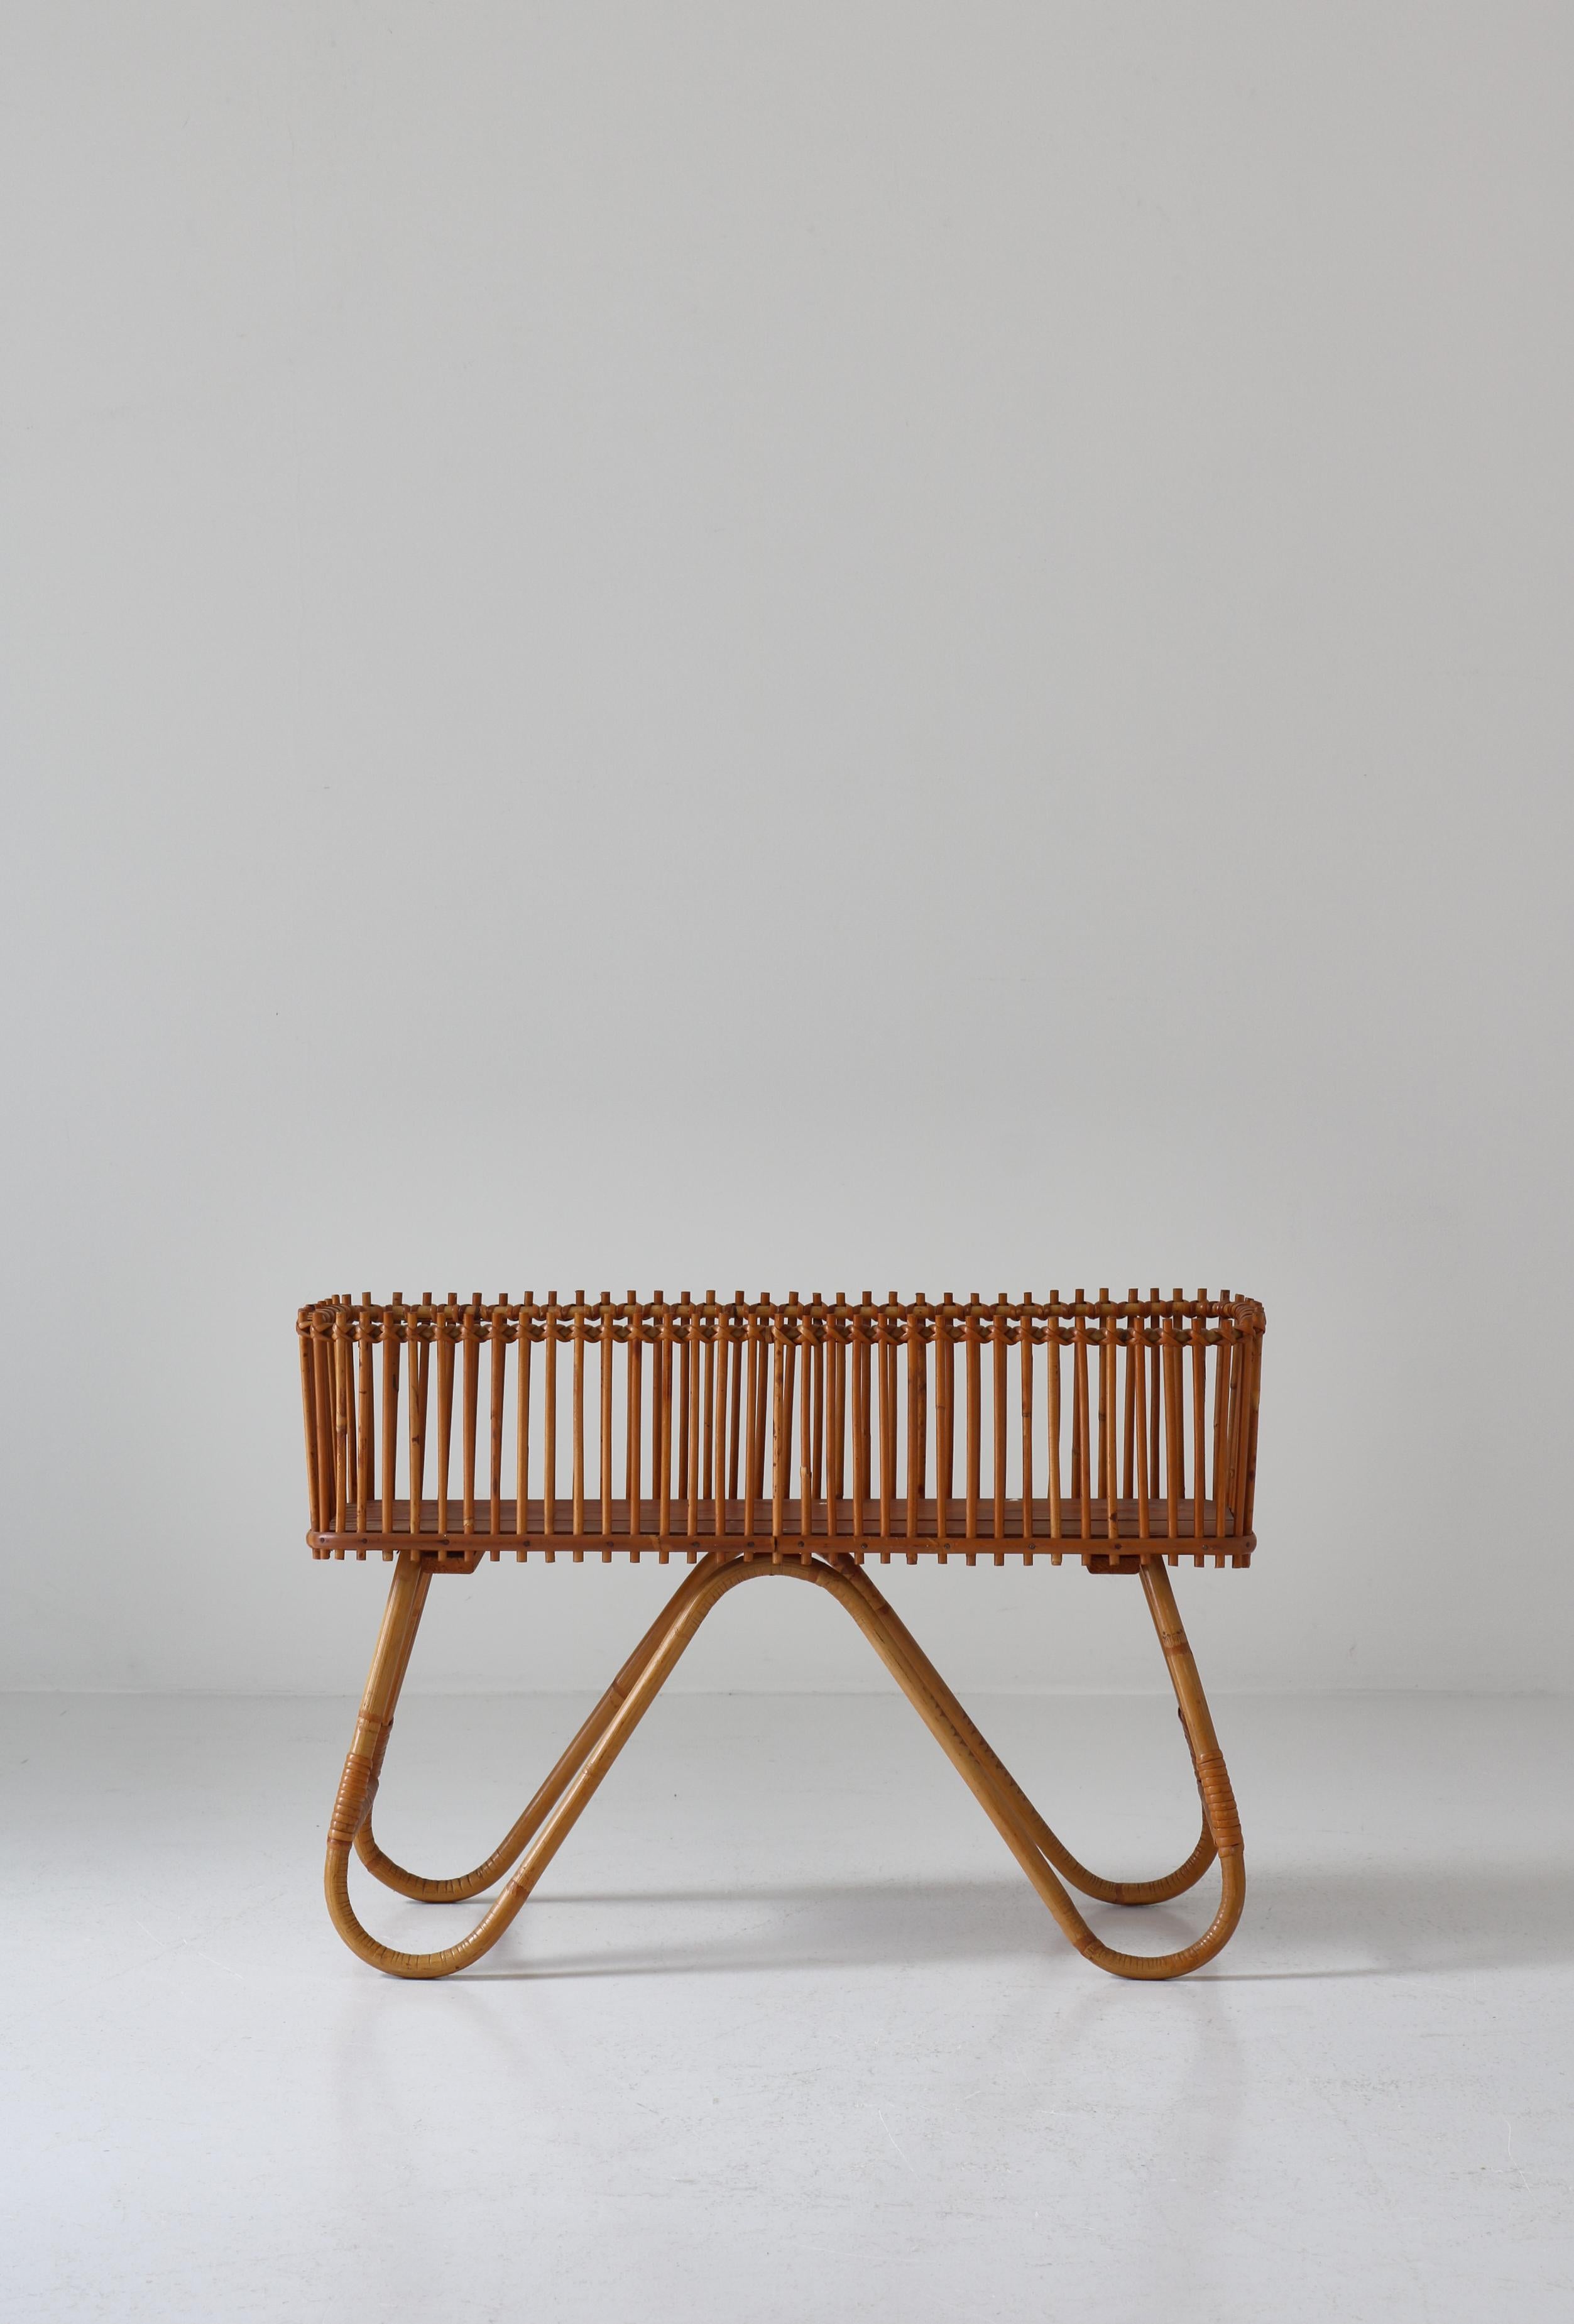 1940s caned cradle